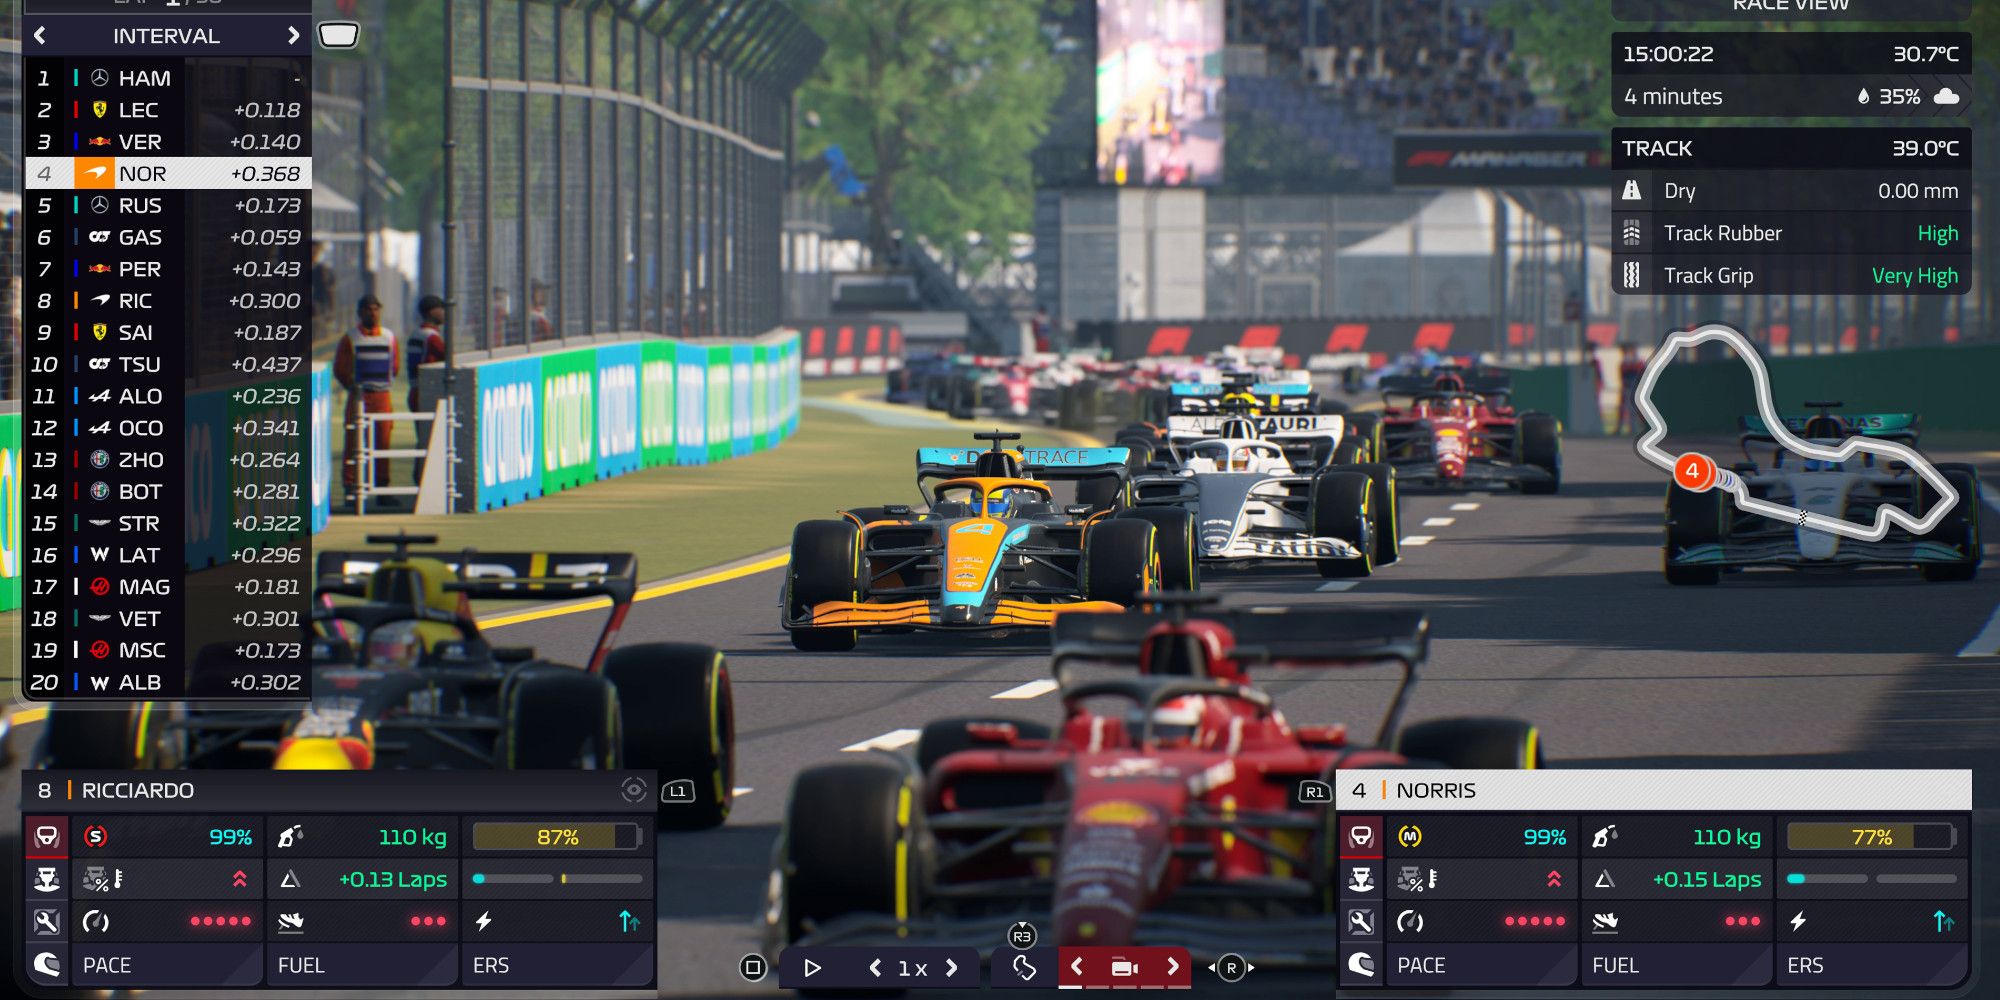 f1 manager 2022 race screen showing the interval and commands you can give to drivers